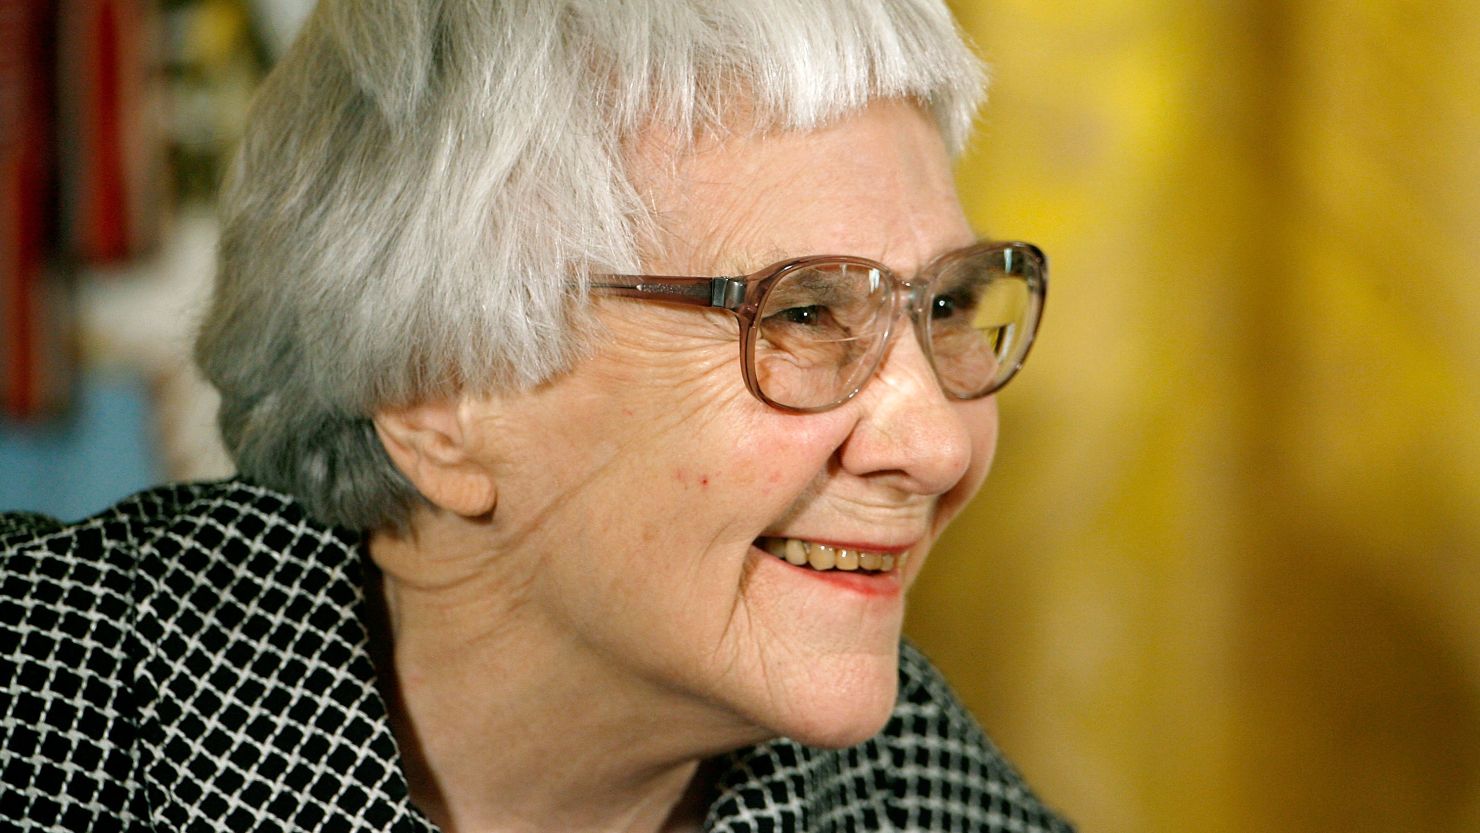 With Tuesday's release of "Go Set a Watchman," Harper Lee now claims two published books under her belt. Now the literary world is buzzing about the possibility of two more novels.